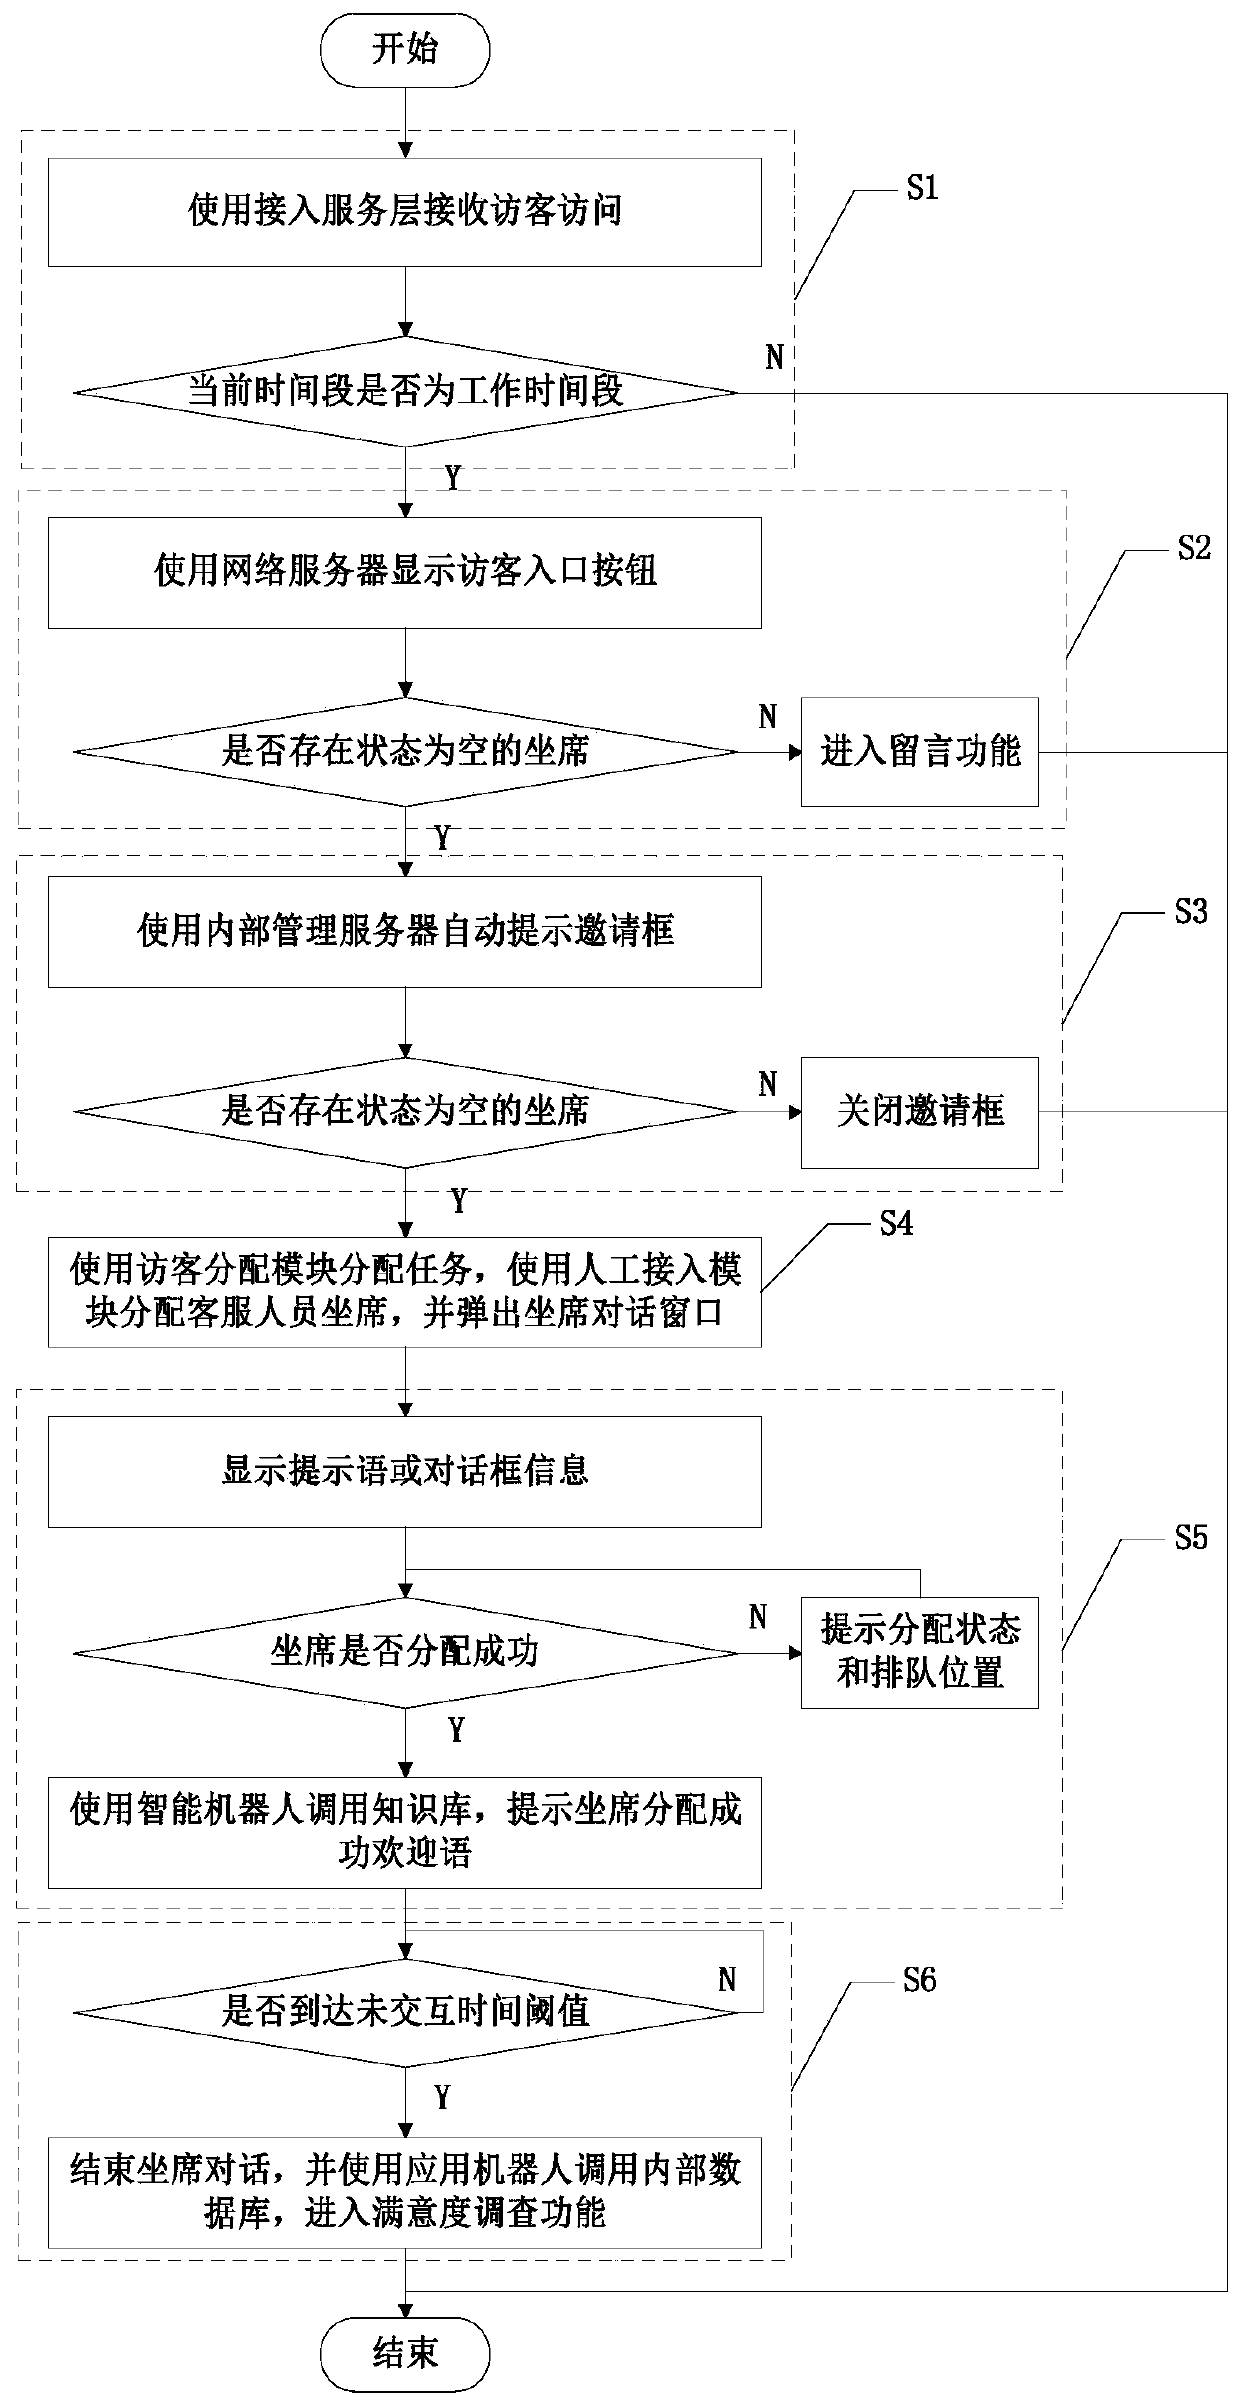 Multi-channel integrated customer support service platform and working method thereof